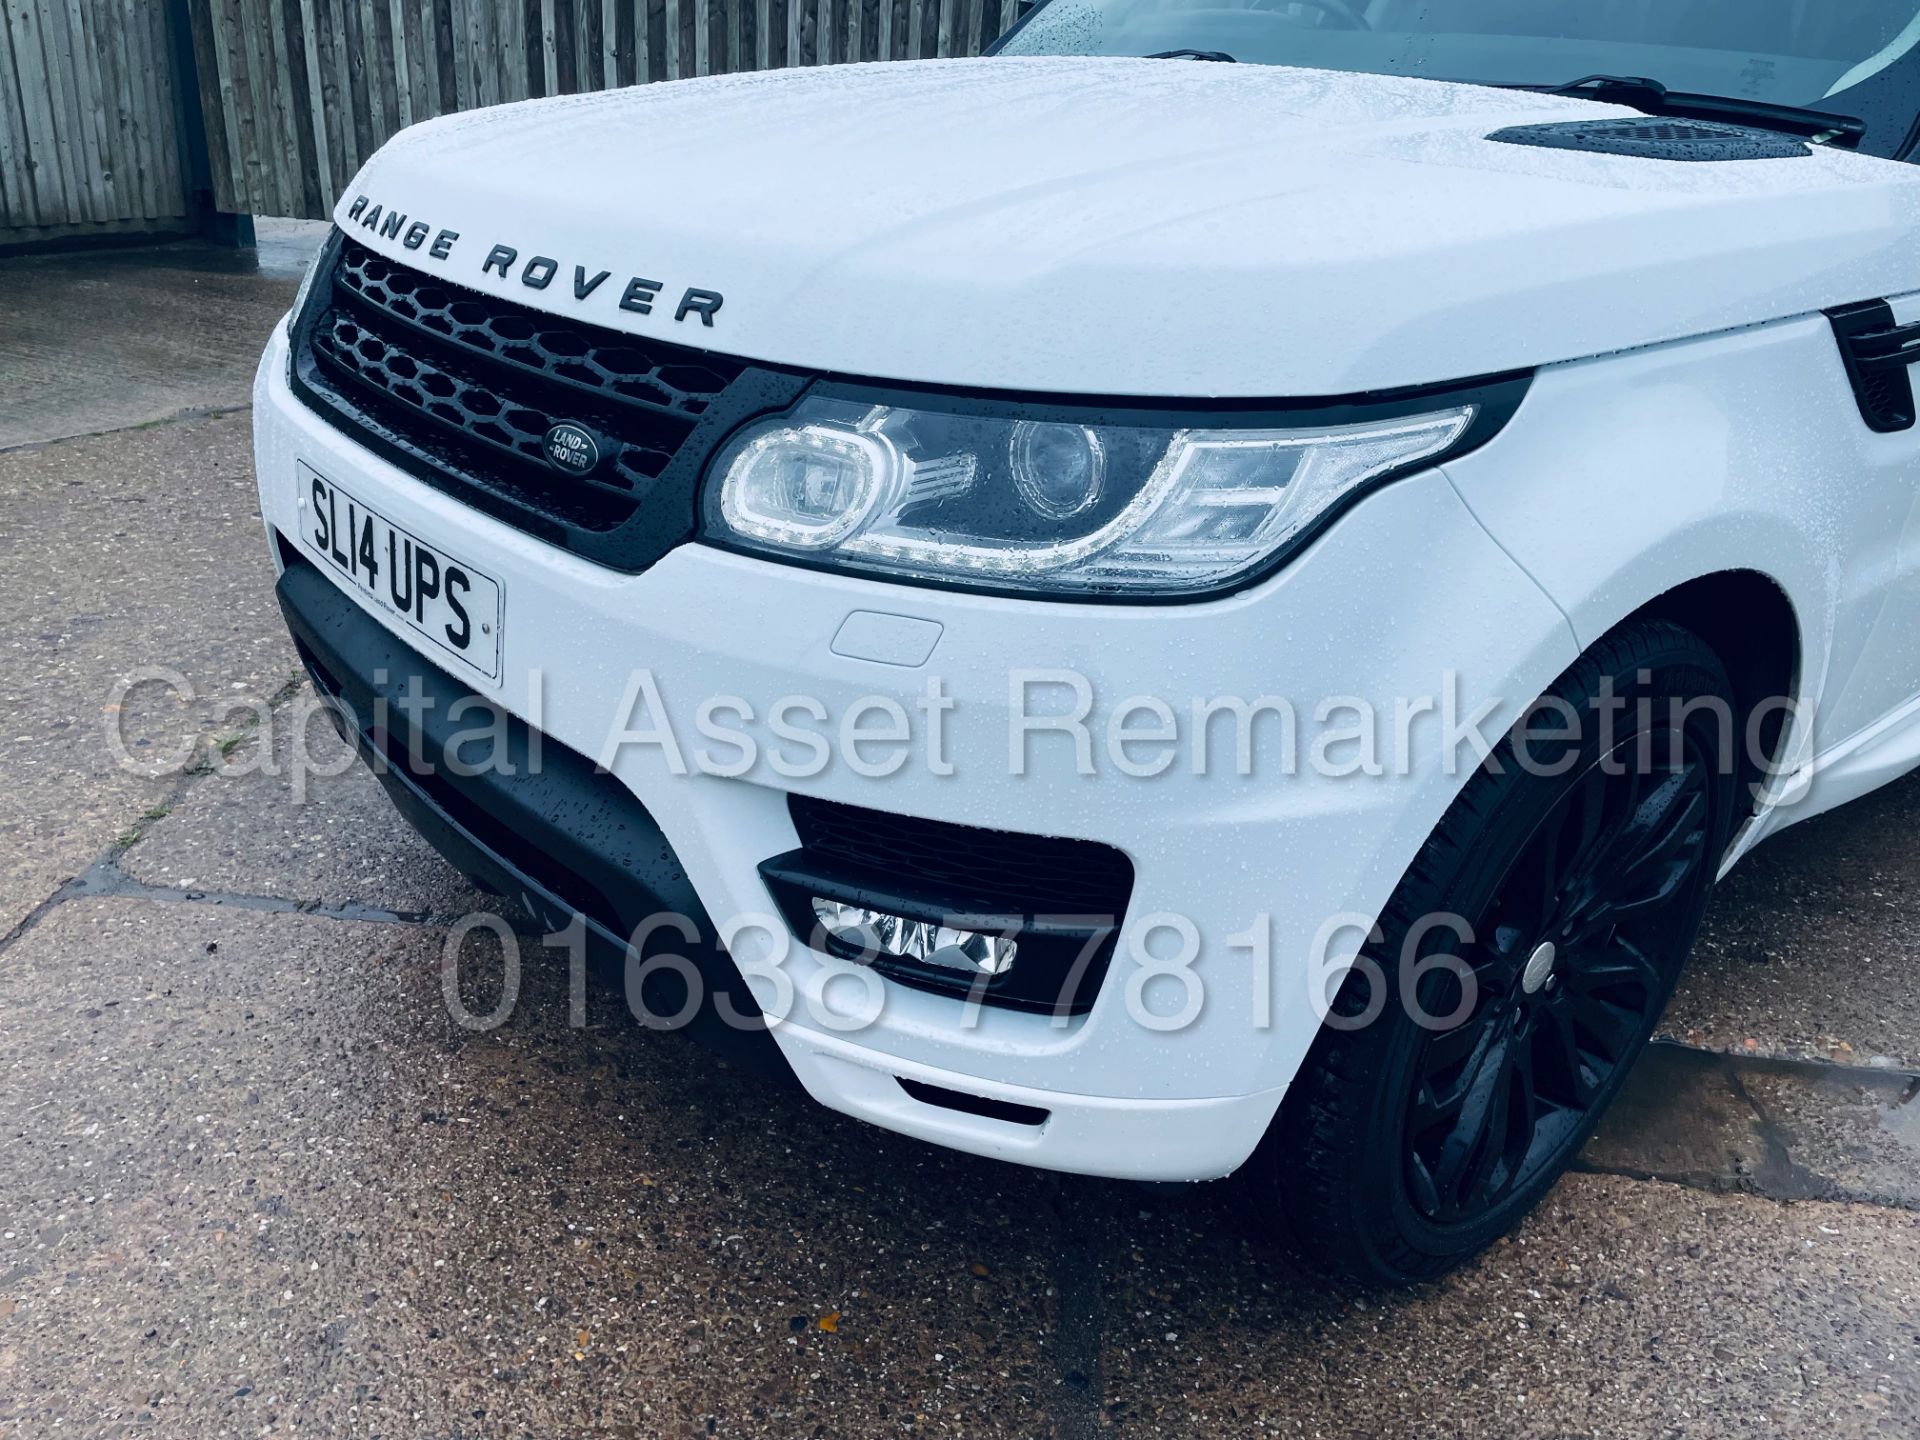 On Sale RANGE ROVER SPORT *SPECIAL EDITION* (2014) '3.0 TDV6 - AUTO' *SAT NAV & PAN ROOF* (TOP SPEC) - Image 16 of 54